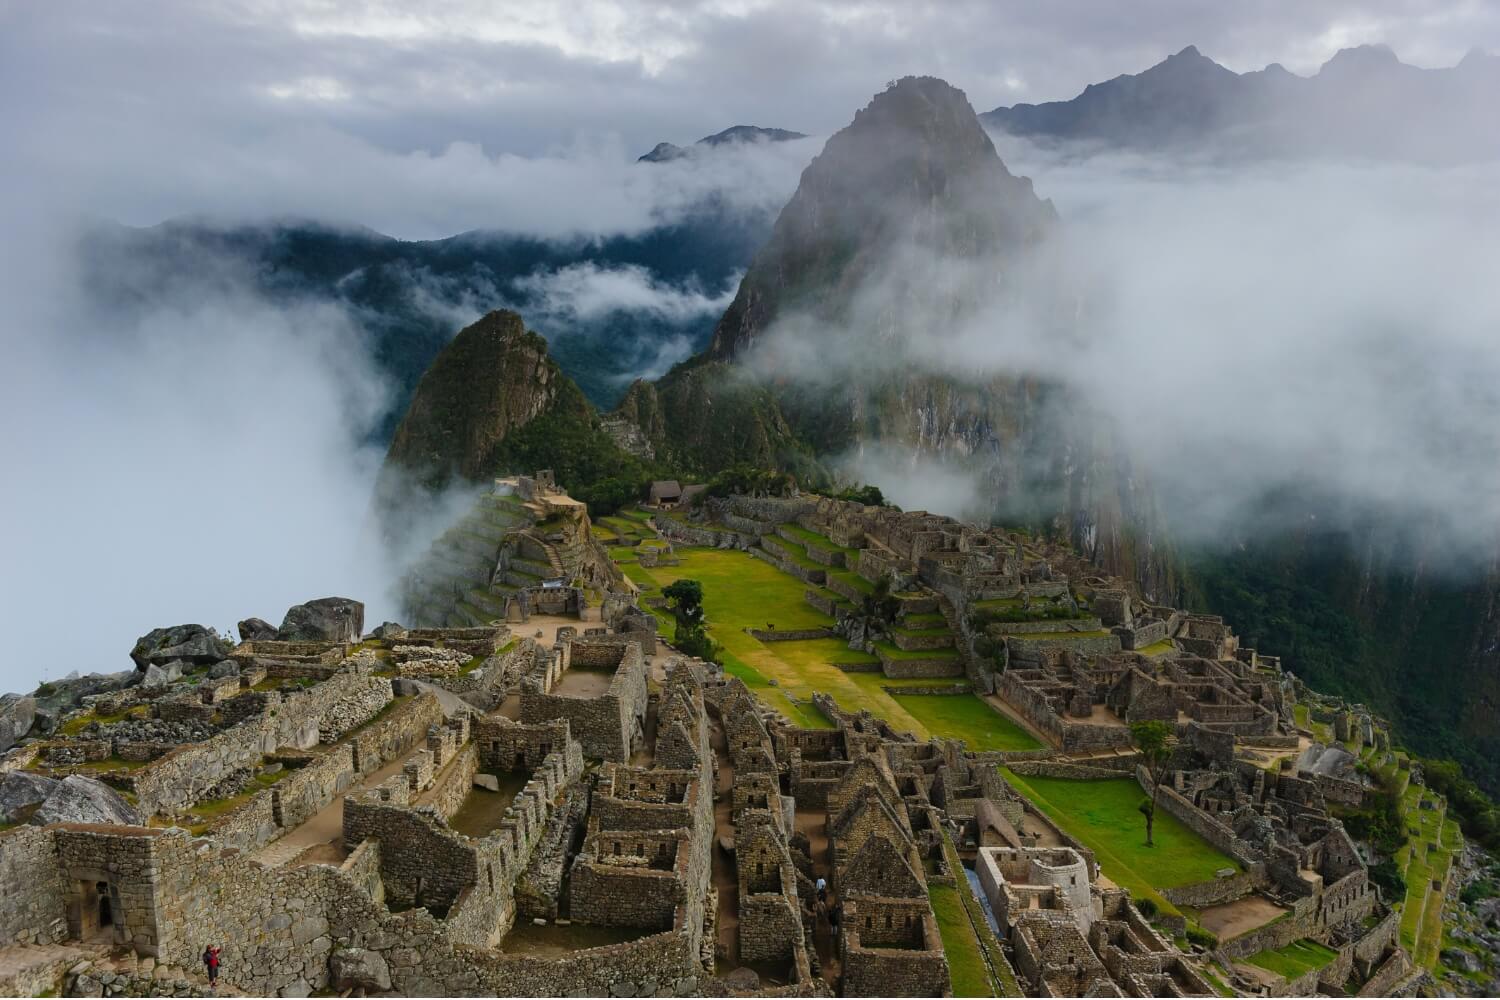 WEATHER AT  MACHU PICCHU IN JANUARY: RAINY AND WARM